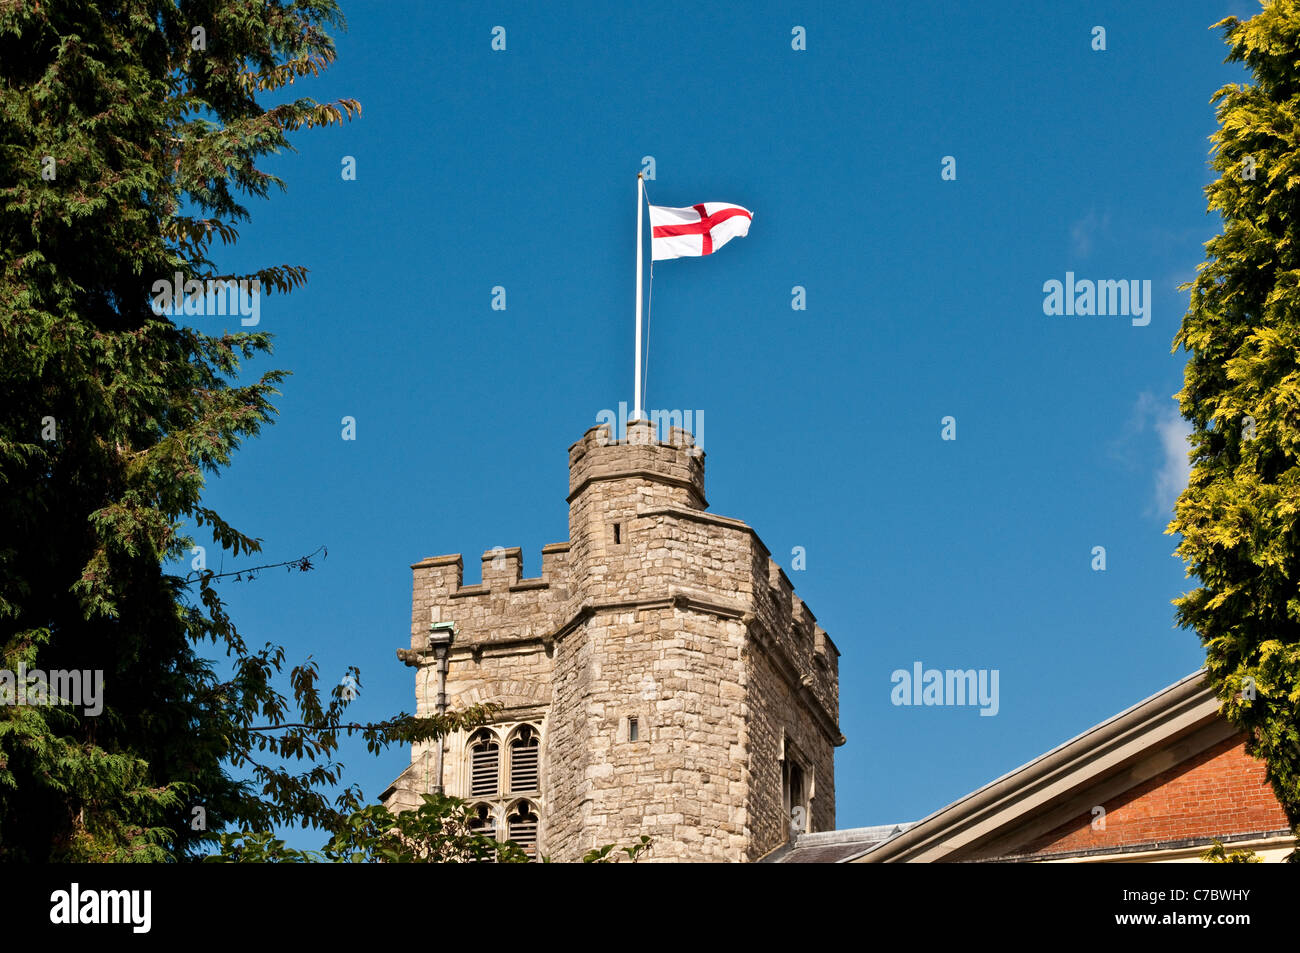 Union Jack waving in the wind on the tower of St Mary’s Parish Church, Twickenham, Middlesex, England, United Kingdom Stock Photo